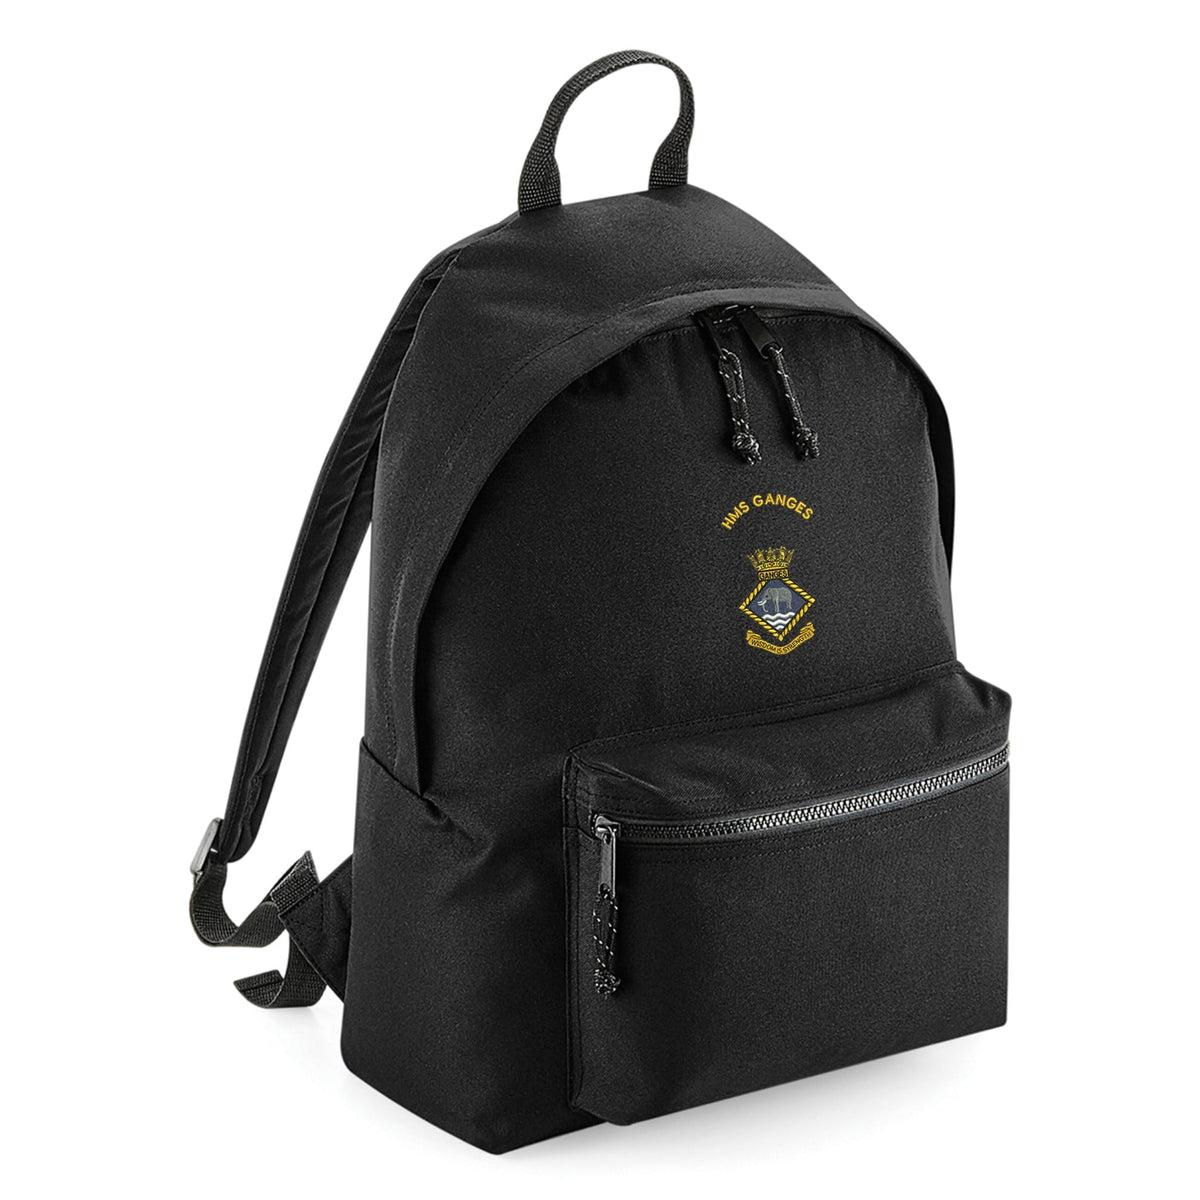 Product HMS Ganges Backpack — The Military Store image